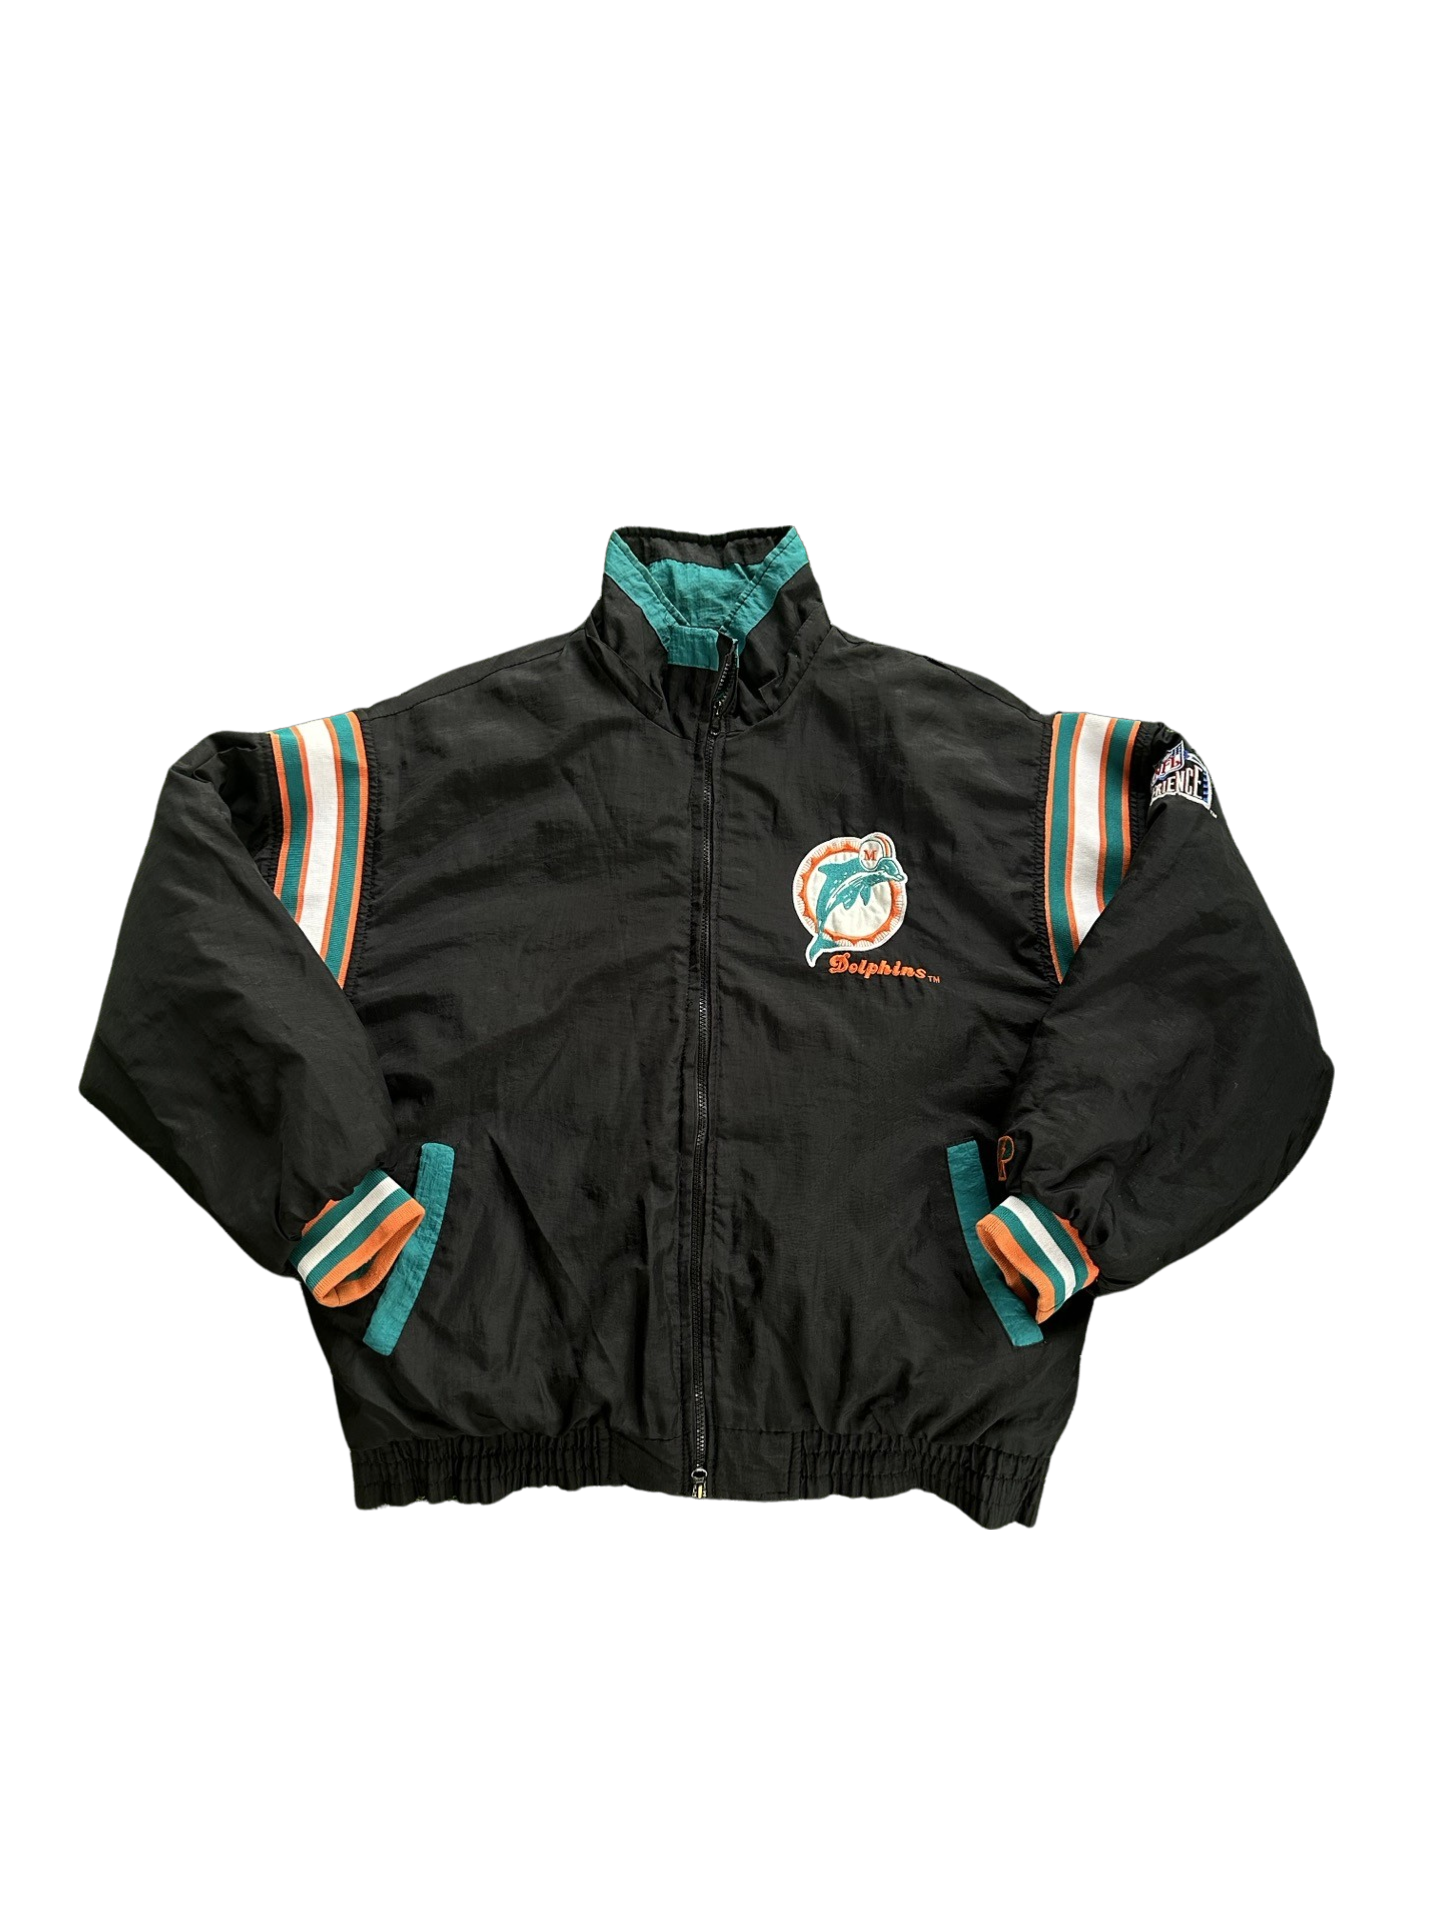 Vintage Miami Dolphins Reversible Puffer Jacket